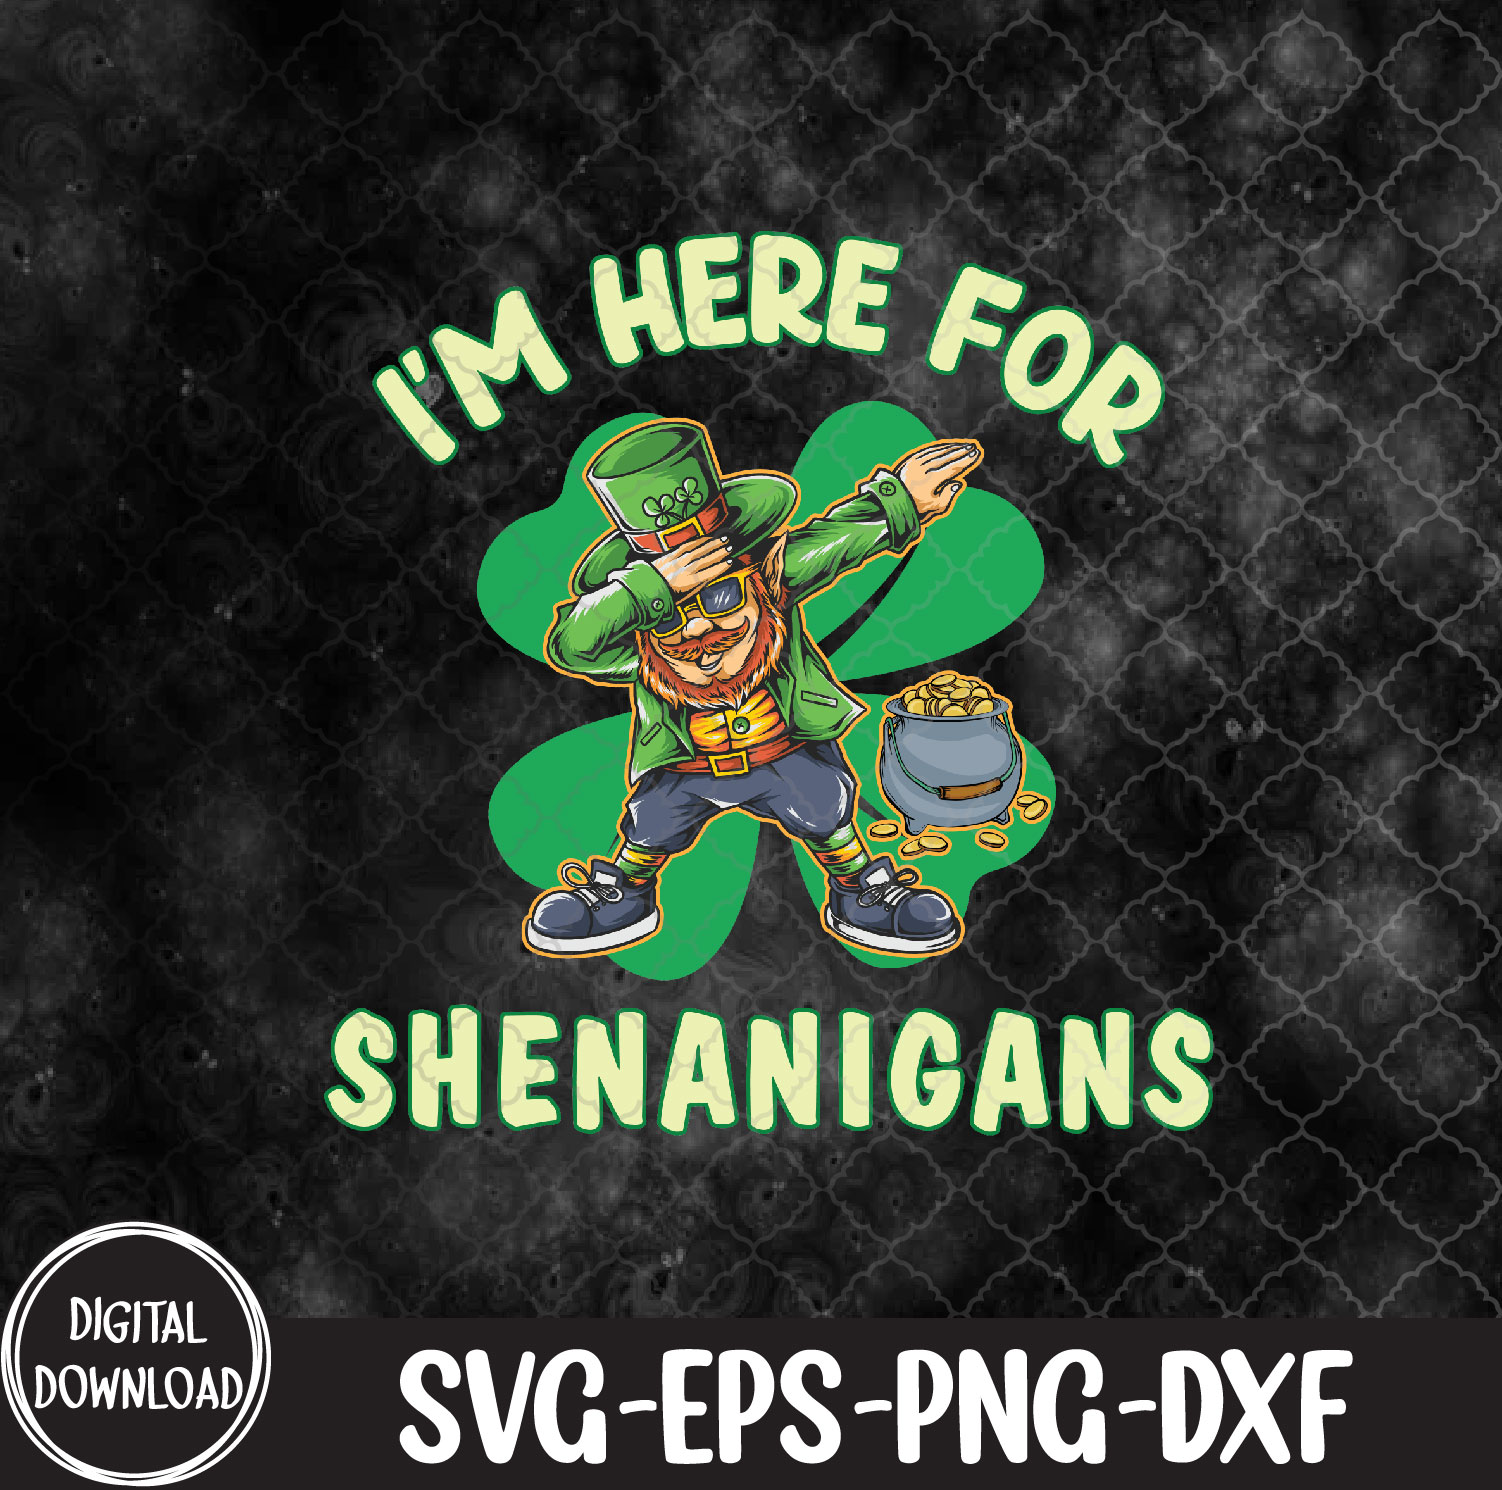 WTMNEW9file 09 66 Im Here For Shenanigans St Patricks Day, Shenanigans svg St Patricks Day svg